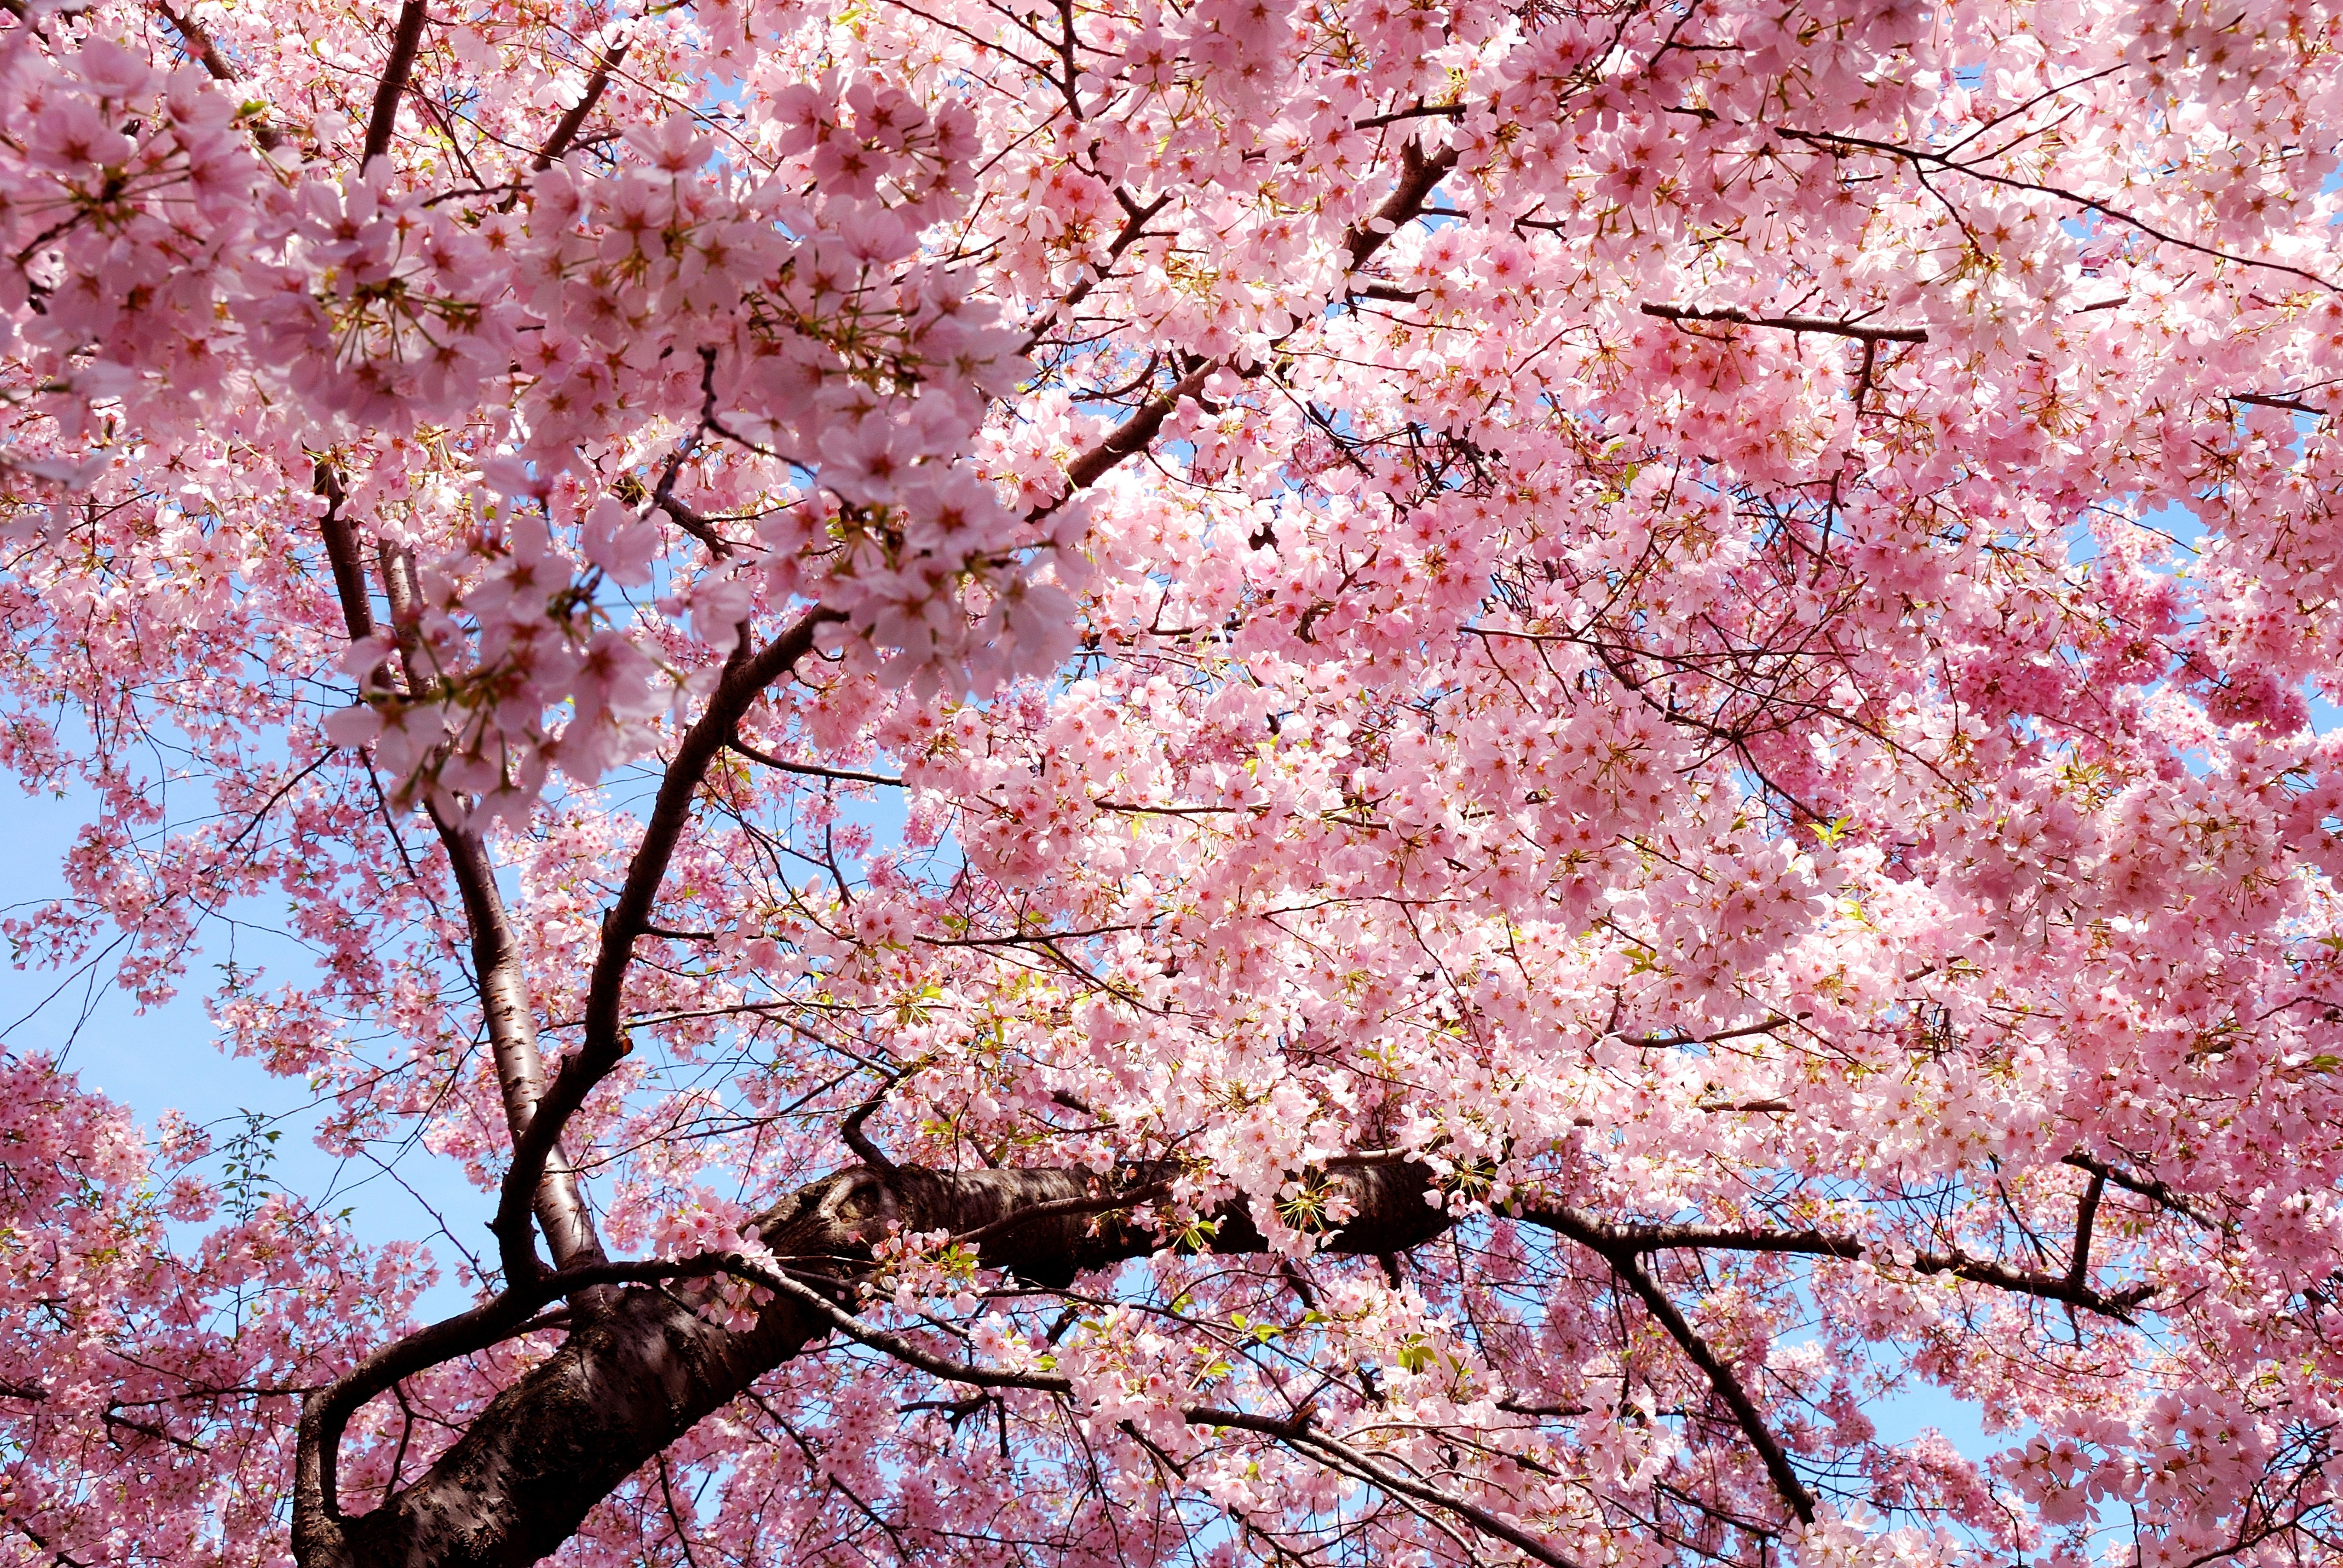 General 7744x5184 pink trees nature magnolia cherry blossom plants